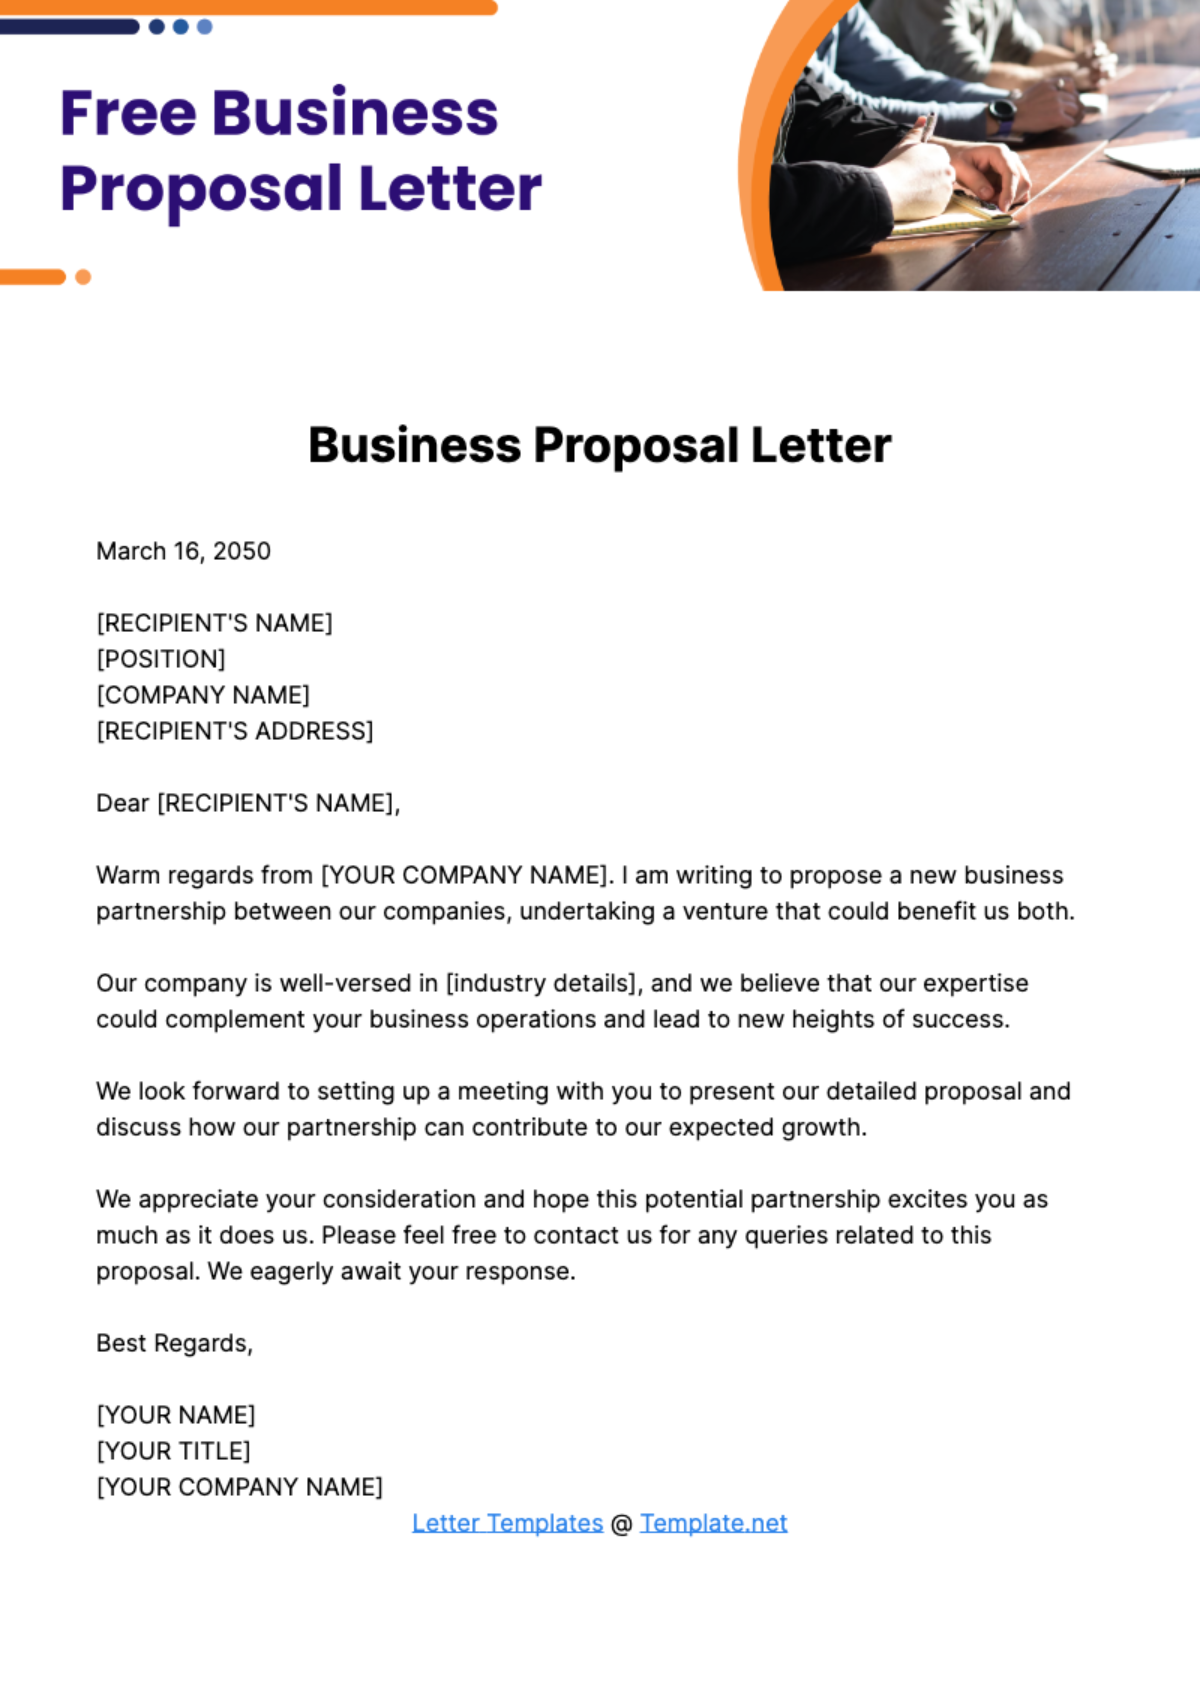 Free Business Proposal Letter Template